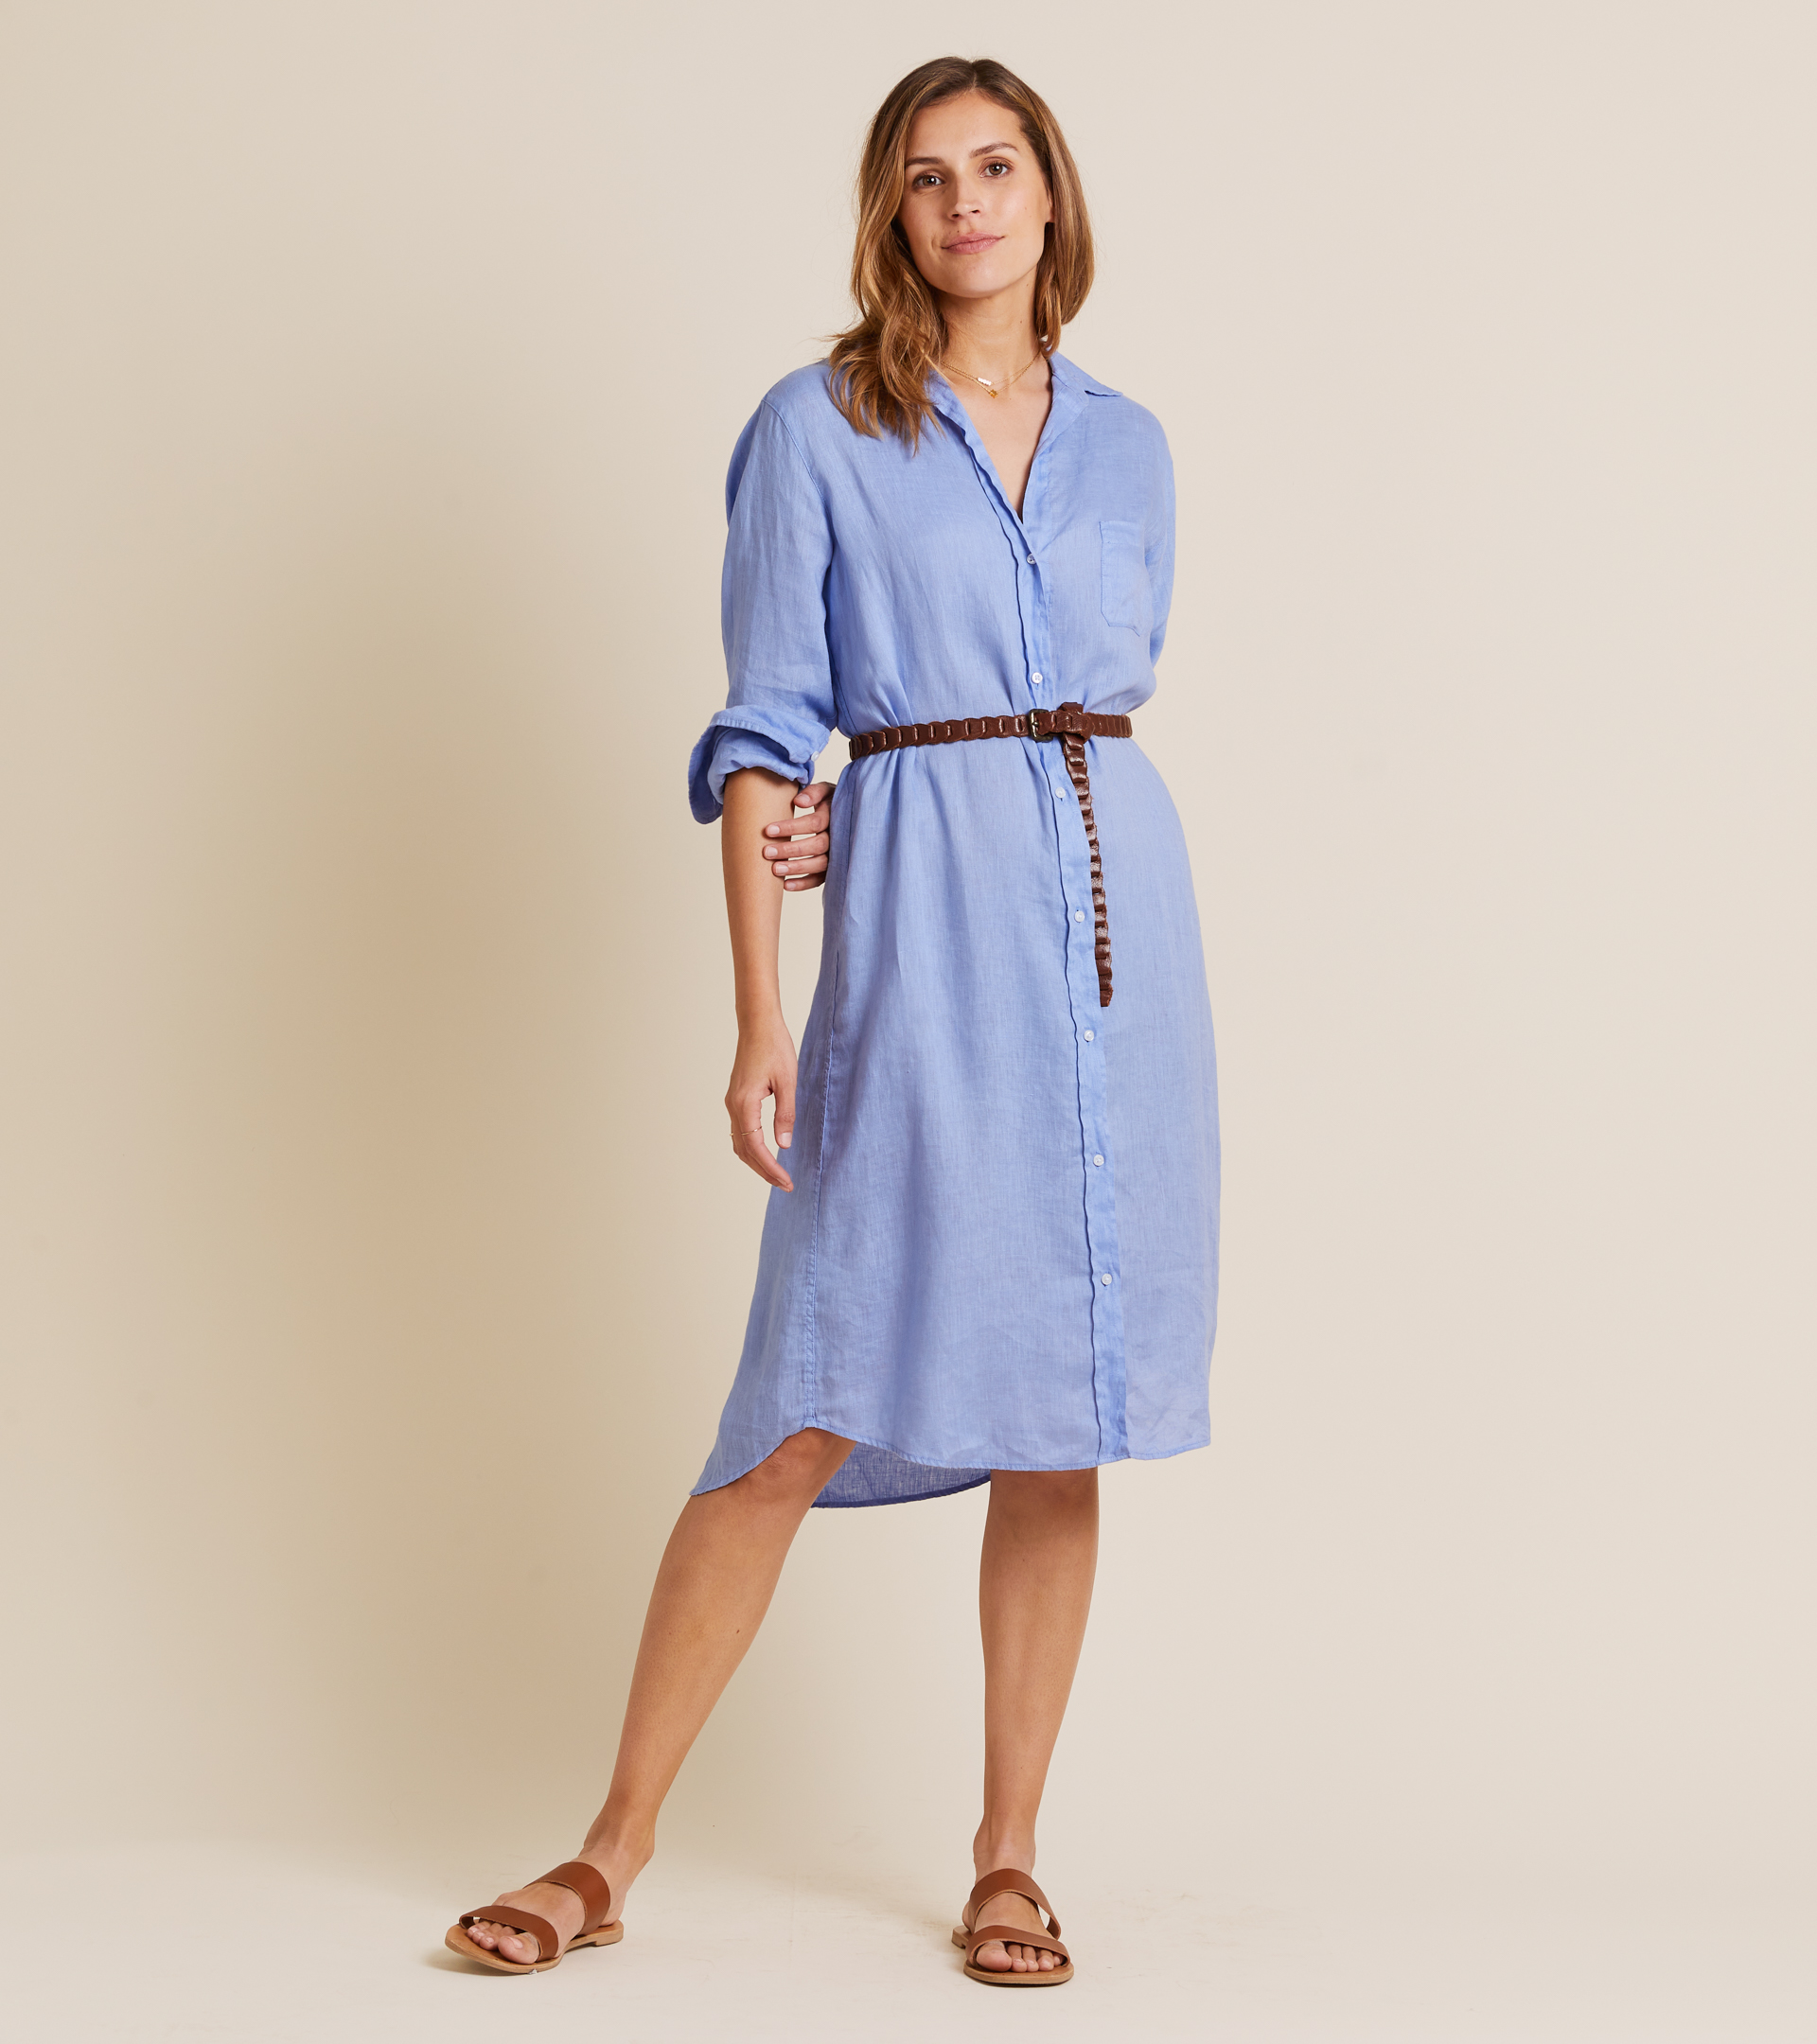 The Hero Midi Dress Periwinkle Blue, Garment Dyed Tumbled Linen view 1